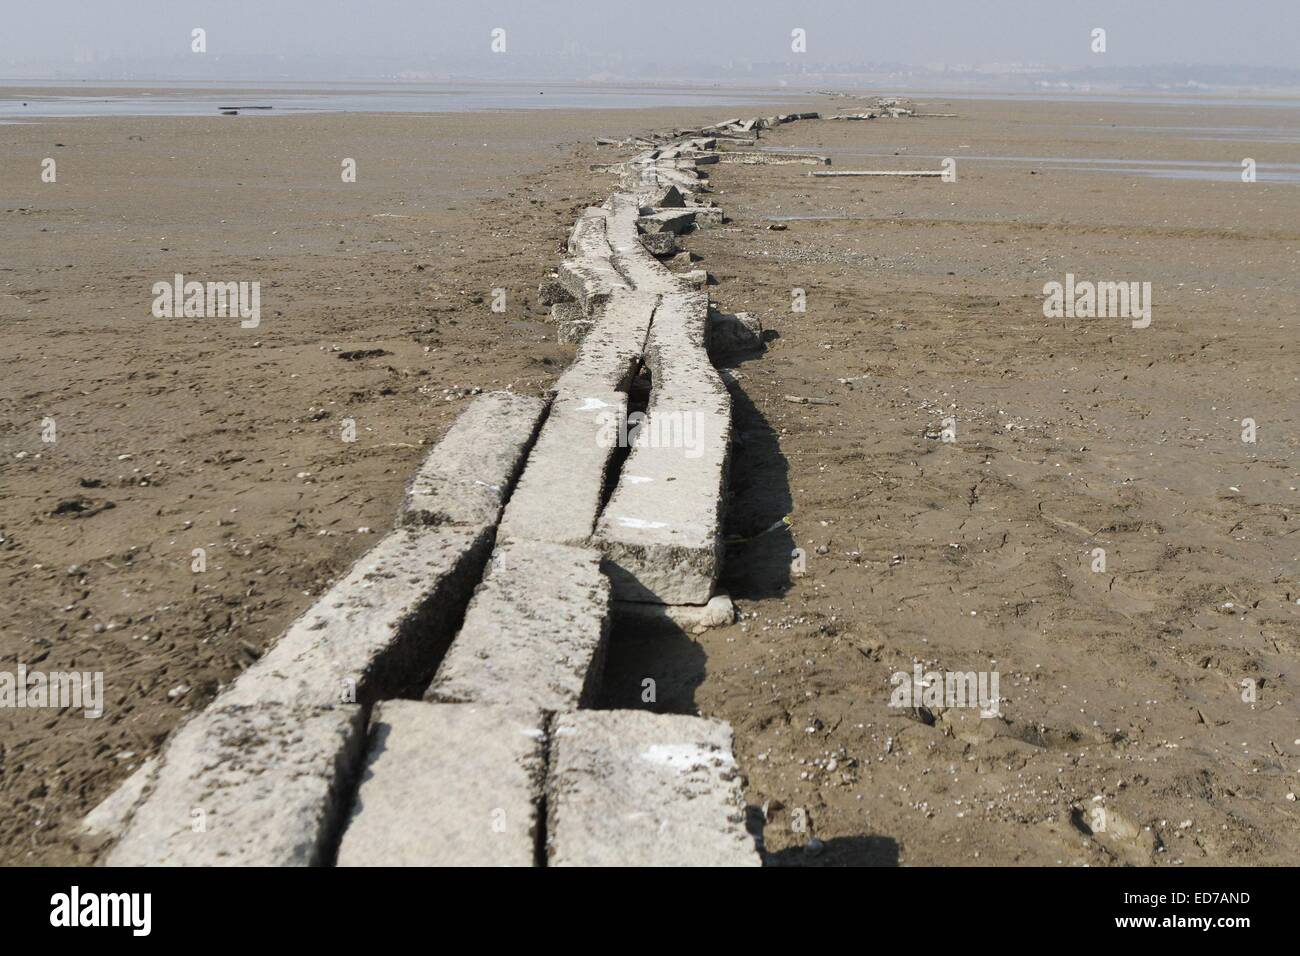 Jiujiang. 30th Dec, 2014. A stone bridge relic of Ming Dynasty (1368-1644) is revealed on the bed of drought-affected Poyang Lake in east China's Jiangxi Province, Dec. 30, 2014. Poyang Lake is renowned for its rich fishing resources, while in recent years, persistent drought and over-exploitation have endangered the lake's resources. © Zhang Jun/Xinhua/Alamy Live News Stock Photo